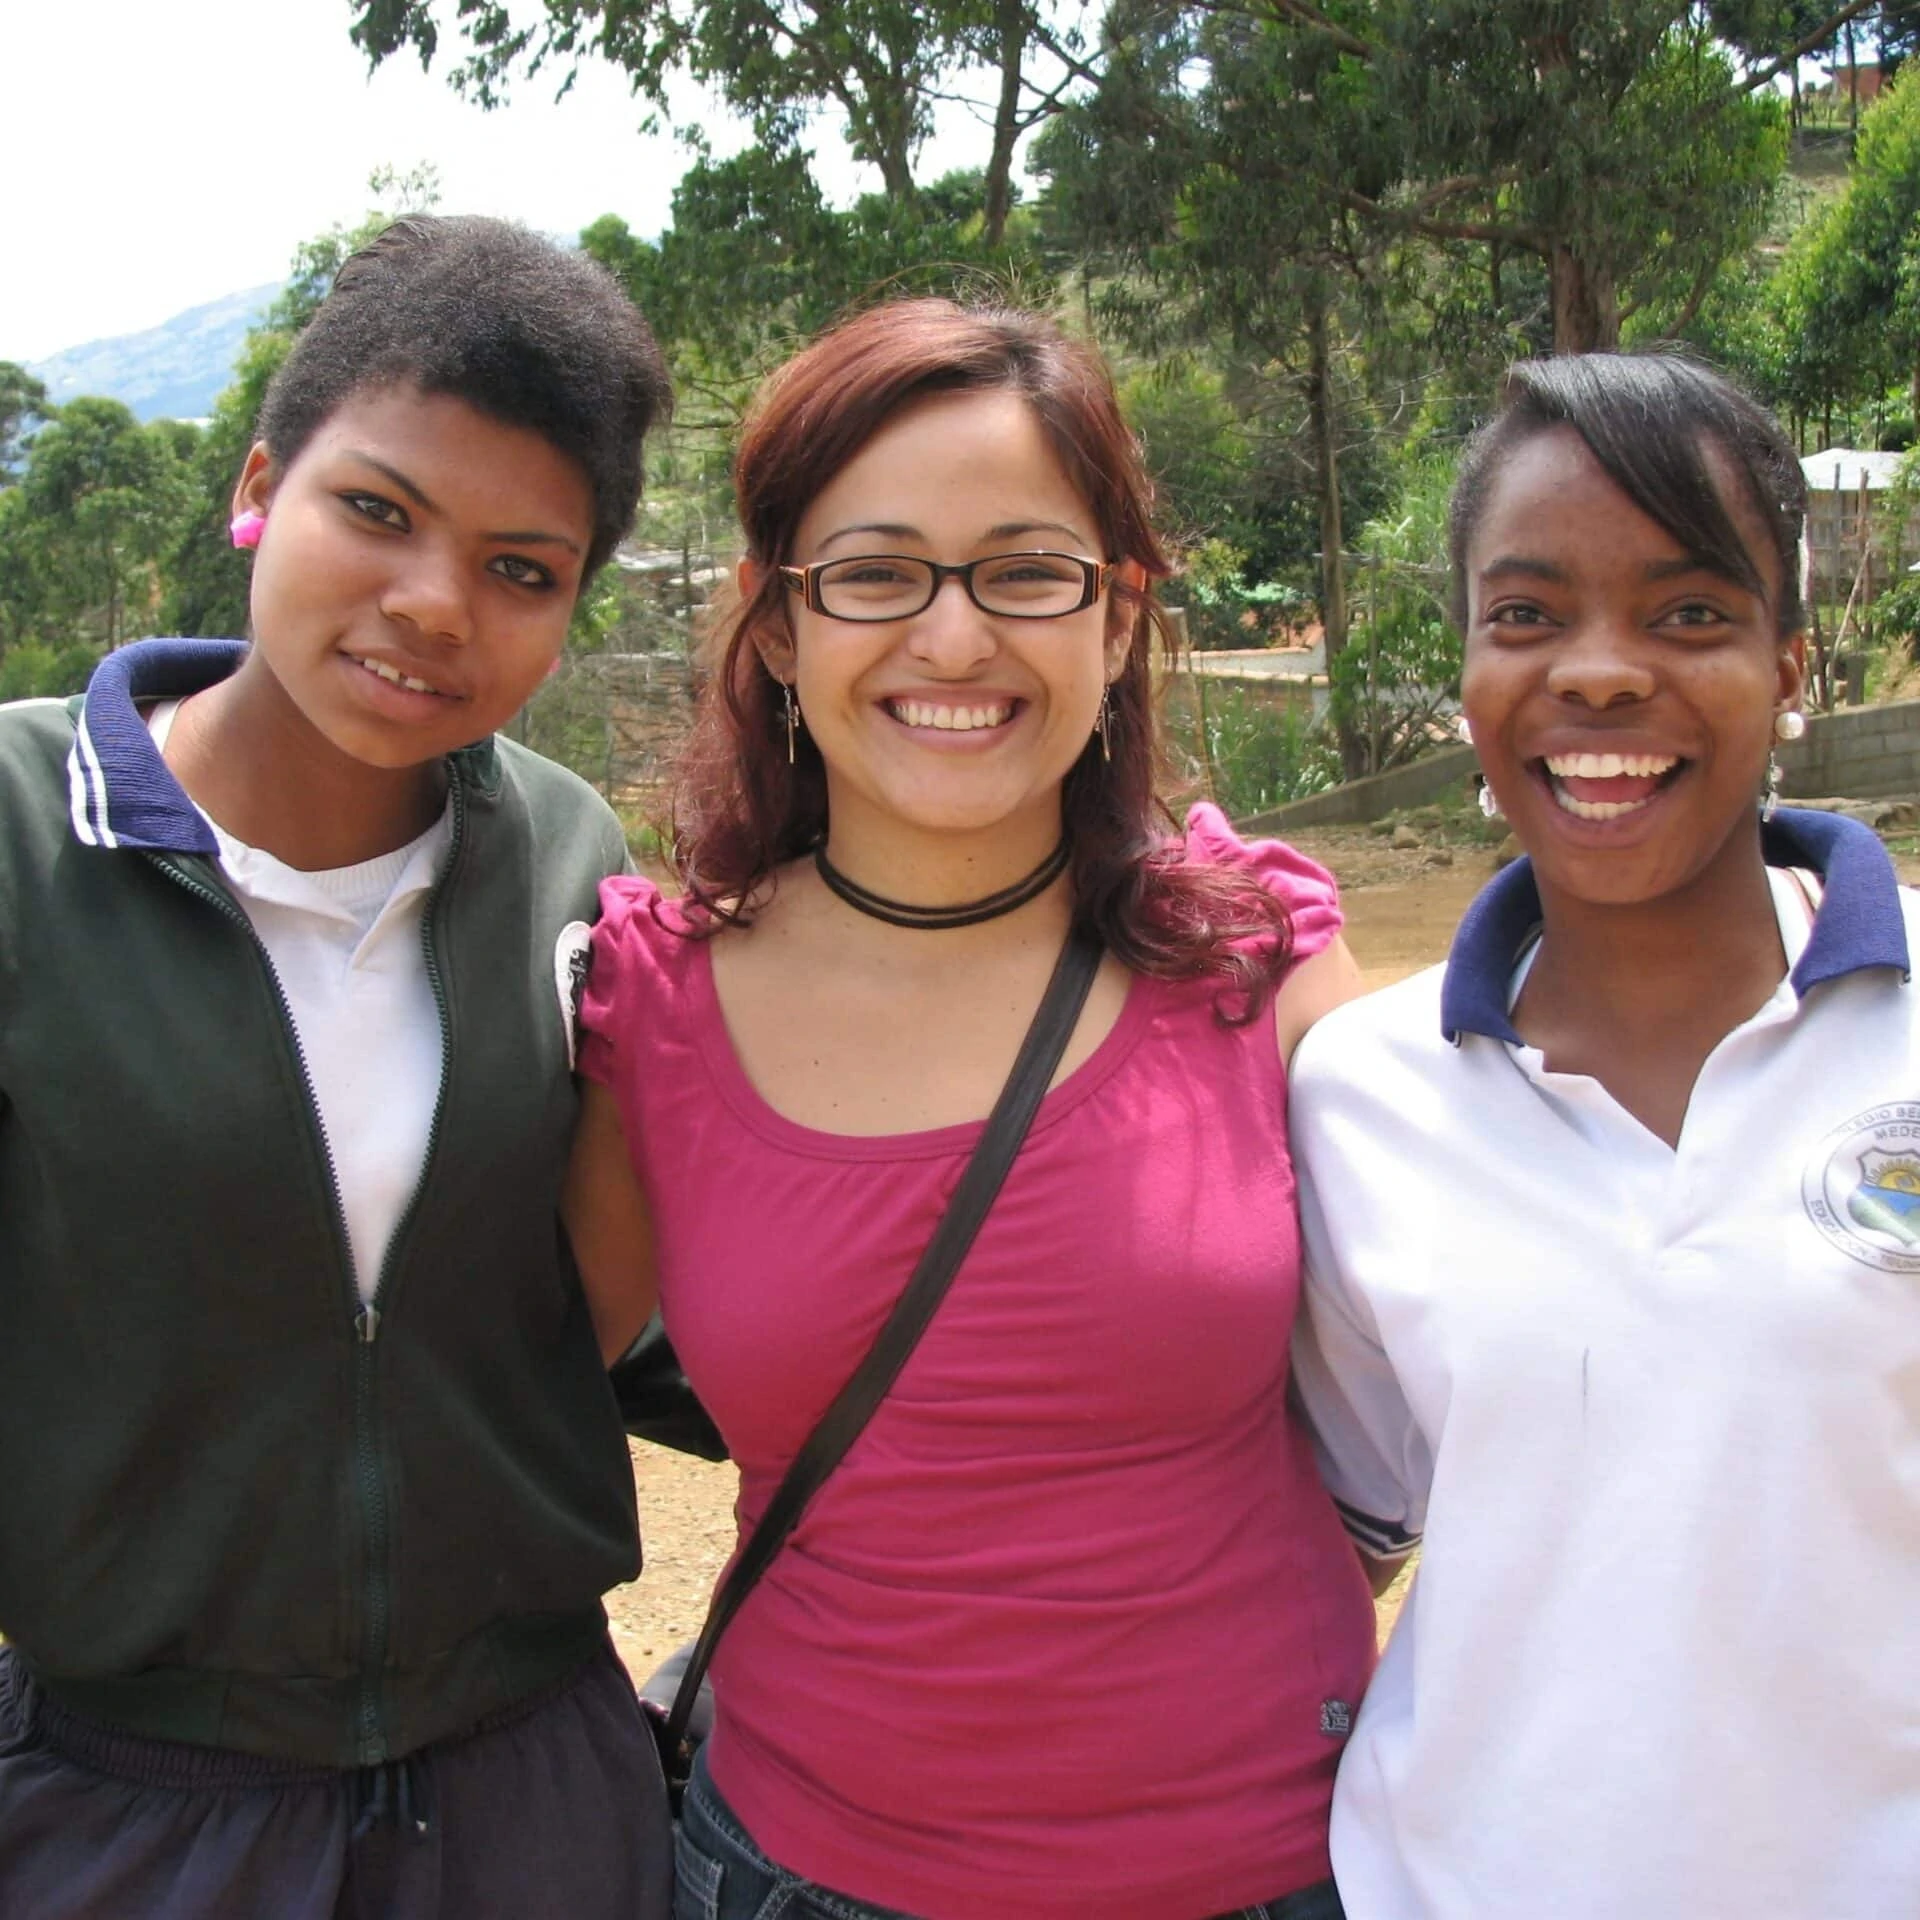 Three young women from Antioquia, Colombia stand smiling arm in arm.